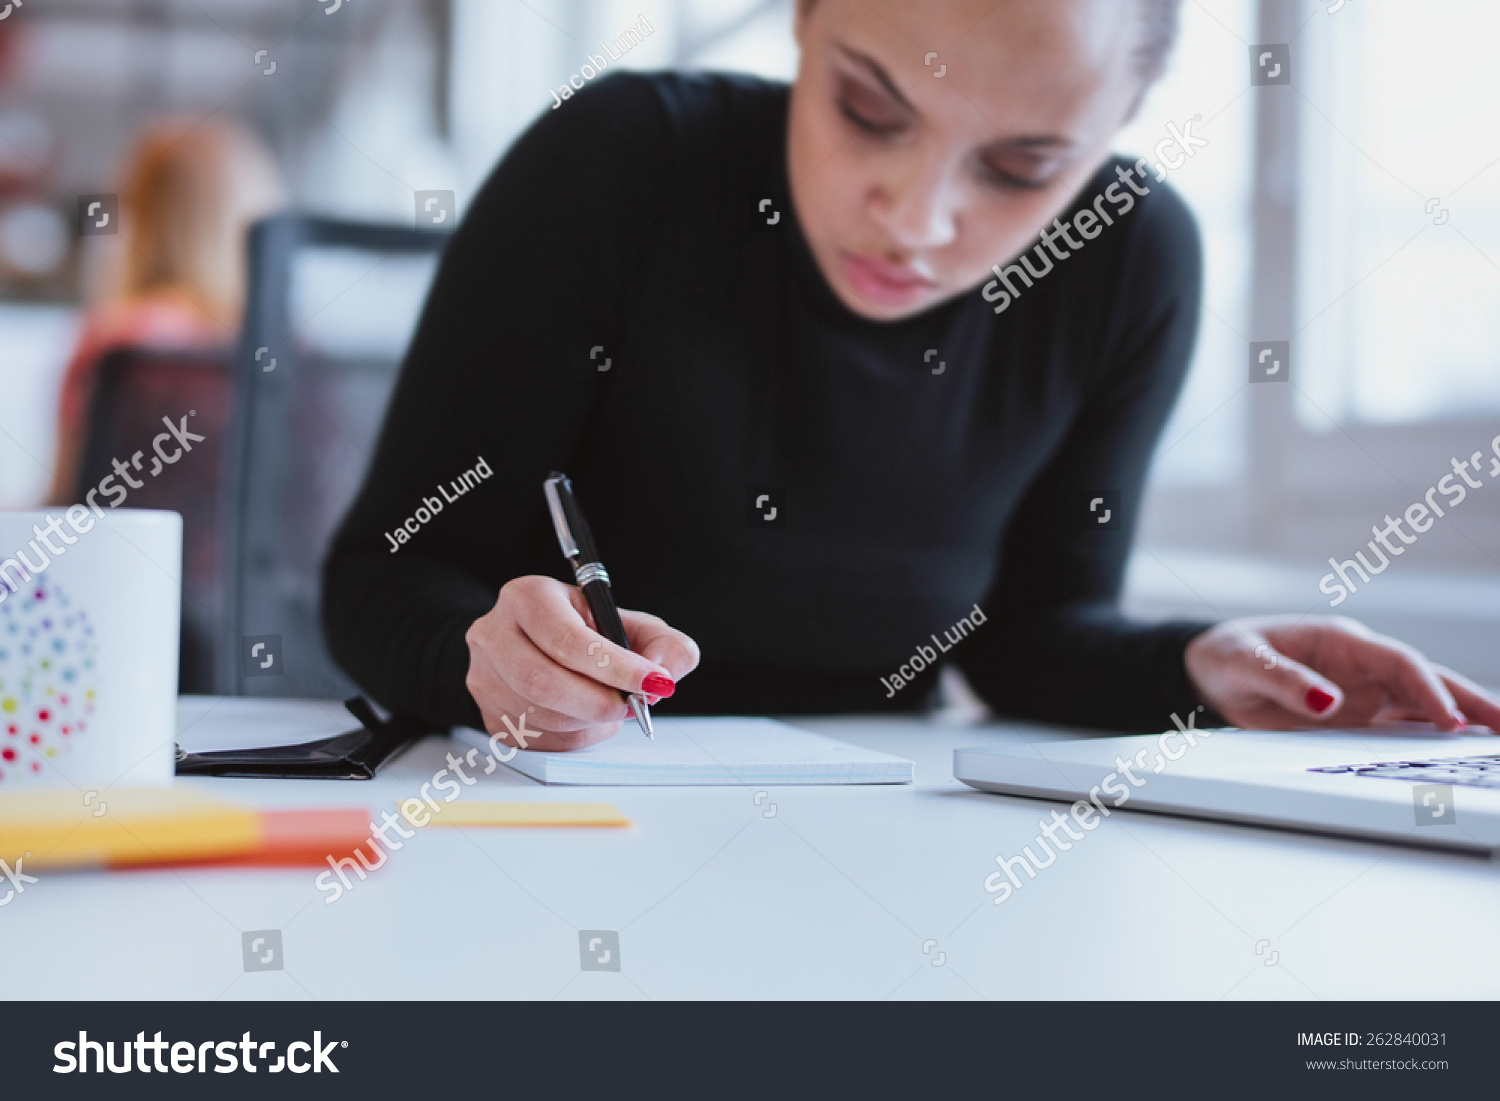 Young woman working at her desk taking notes. Focus on hand writing on a notepad. #262840031